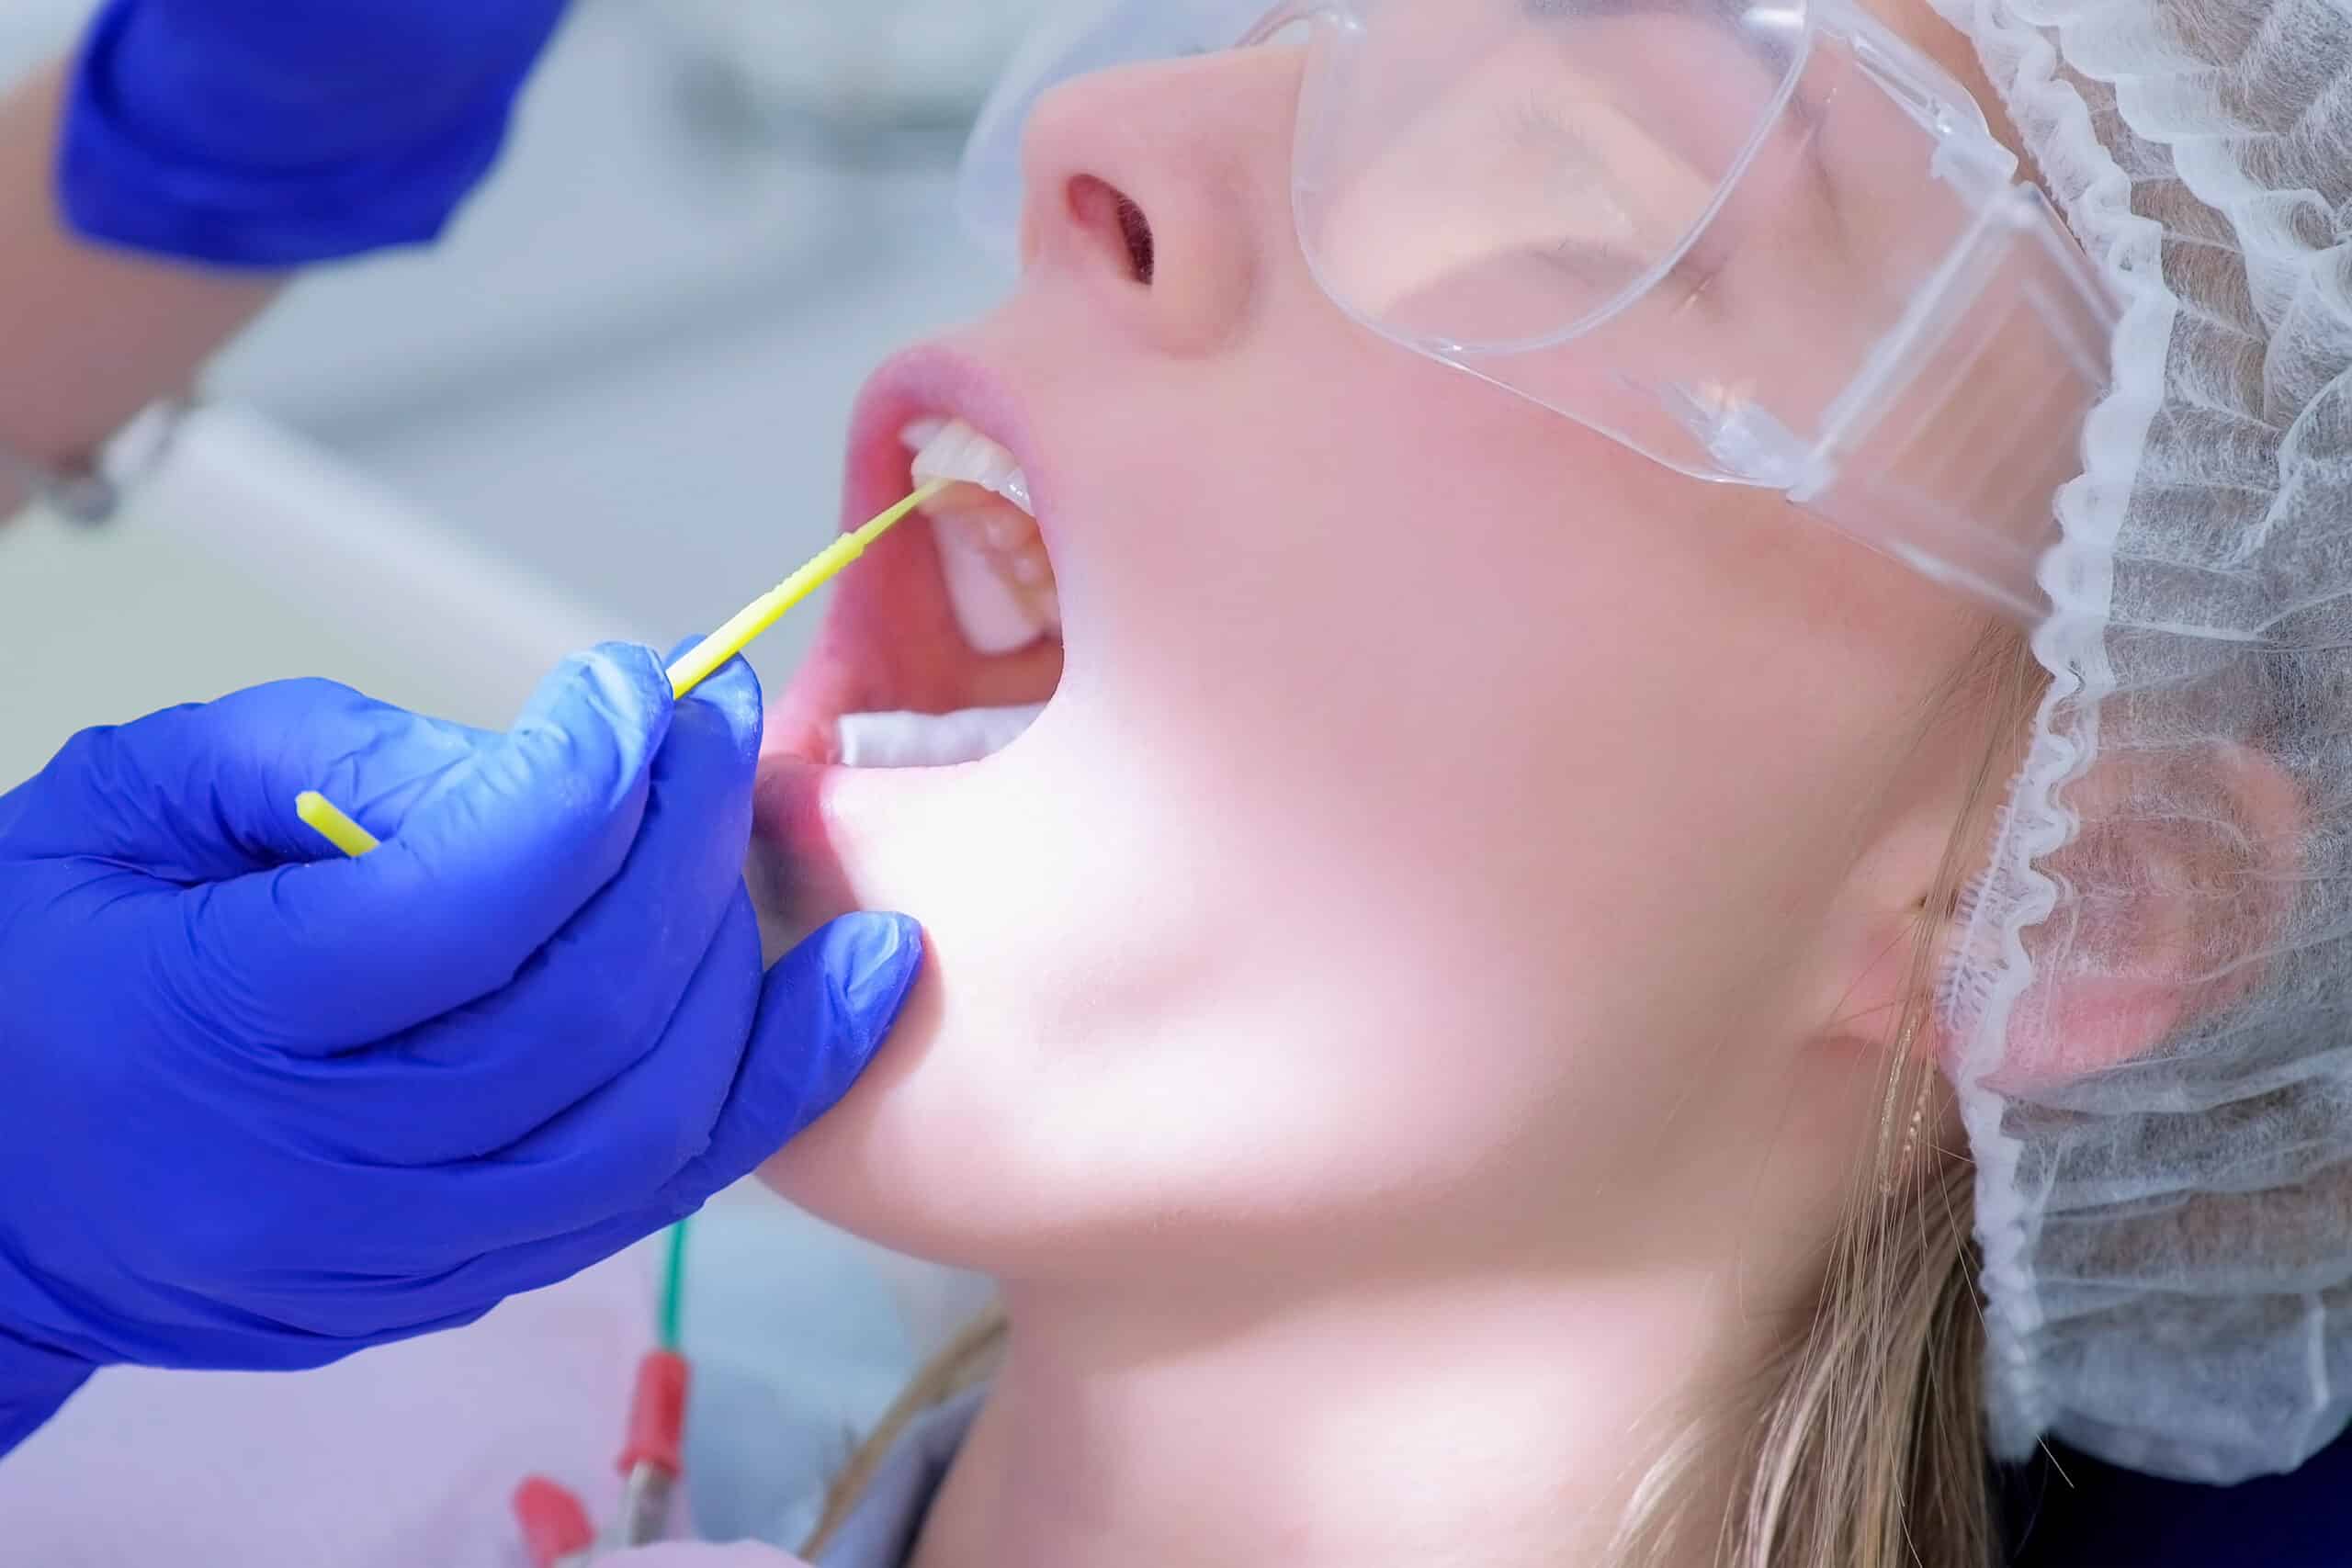 Dentist make fluoridation of teeth after ultrasonic cleaning for young woman